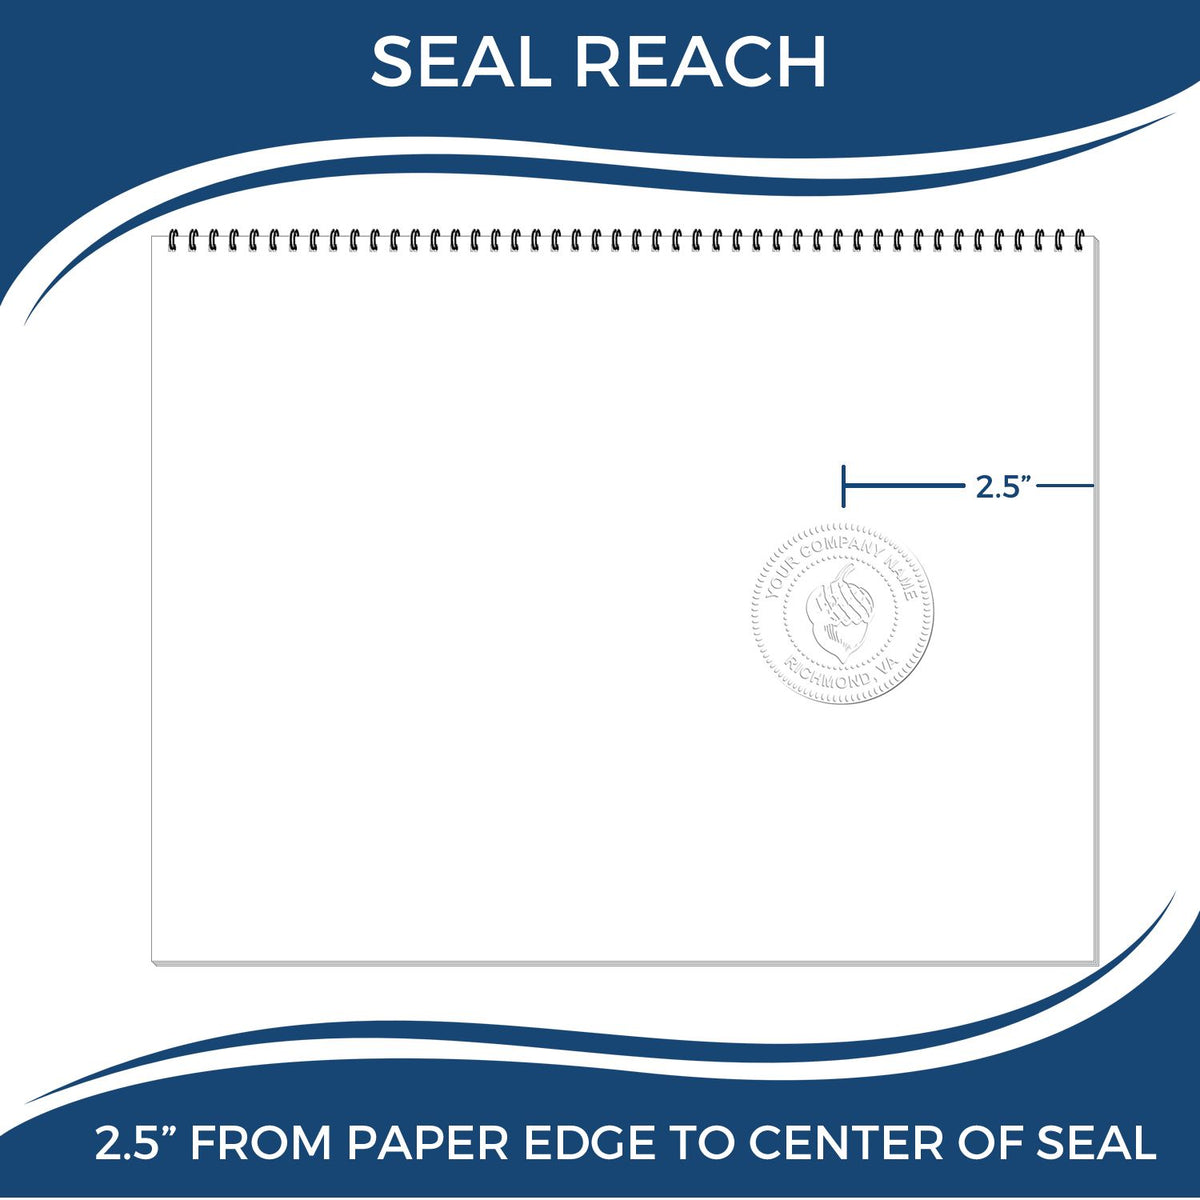 An infographic showing the seal reach which is represented by a ruler and a miniature seal image of the Heavy Duty Cast Iron Connecticut Geologist Seal Embosser